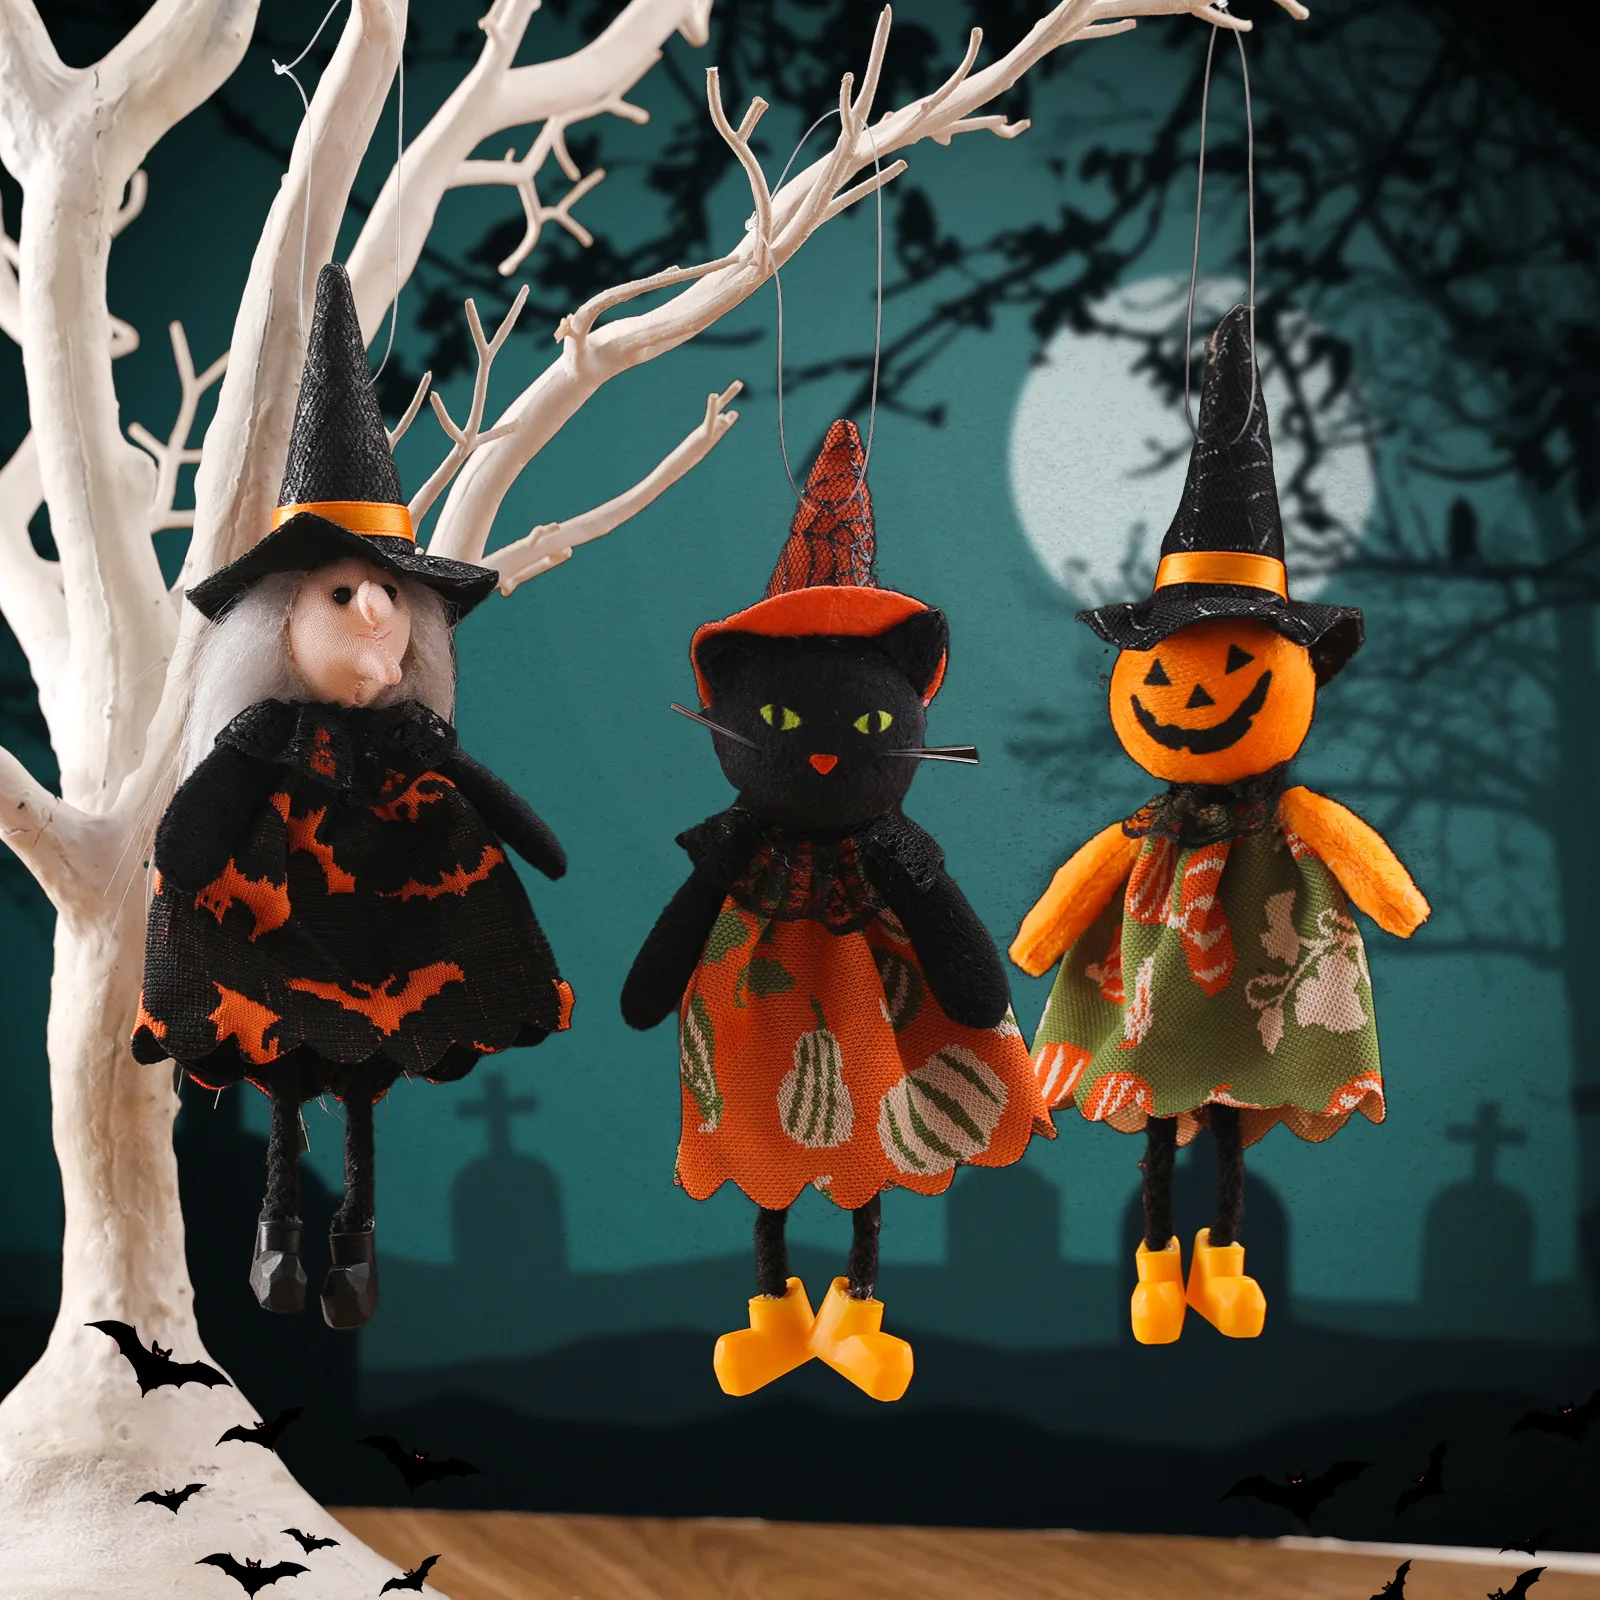 

Halloween Hanging Ghost Decor Outdoor,Pumpkin Witch Tree Ornaments,Cute Straw Windsock Pendant Home Indoor Decor Yard Patio Lawn